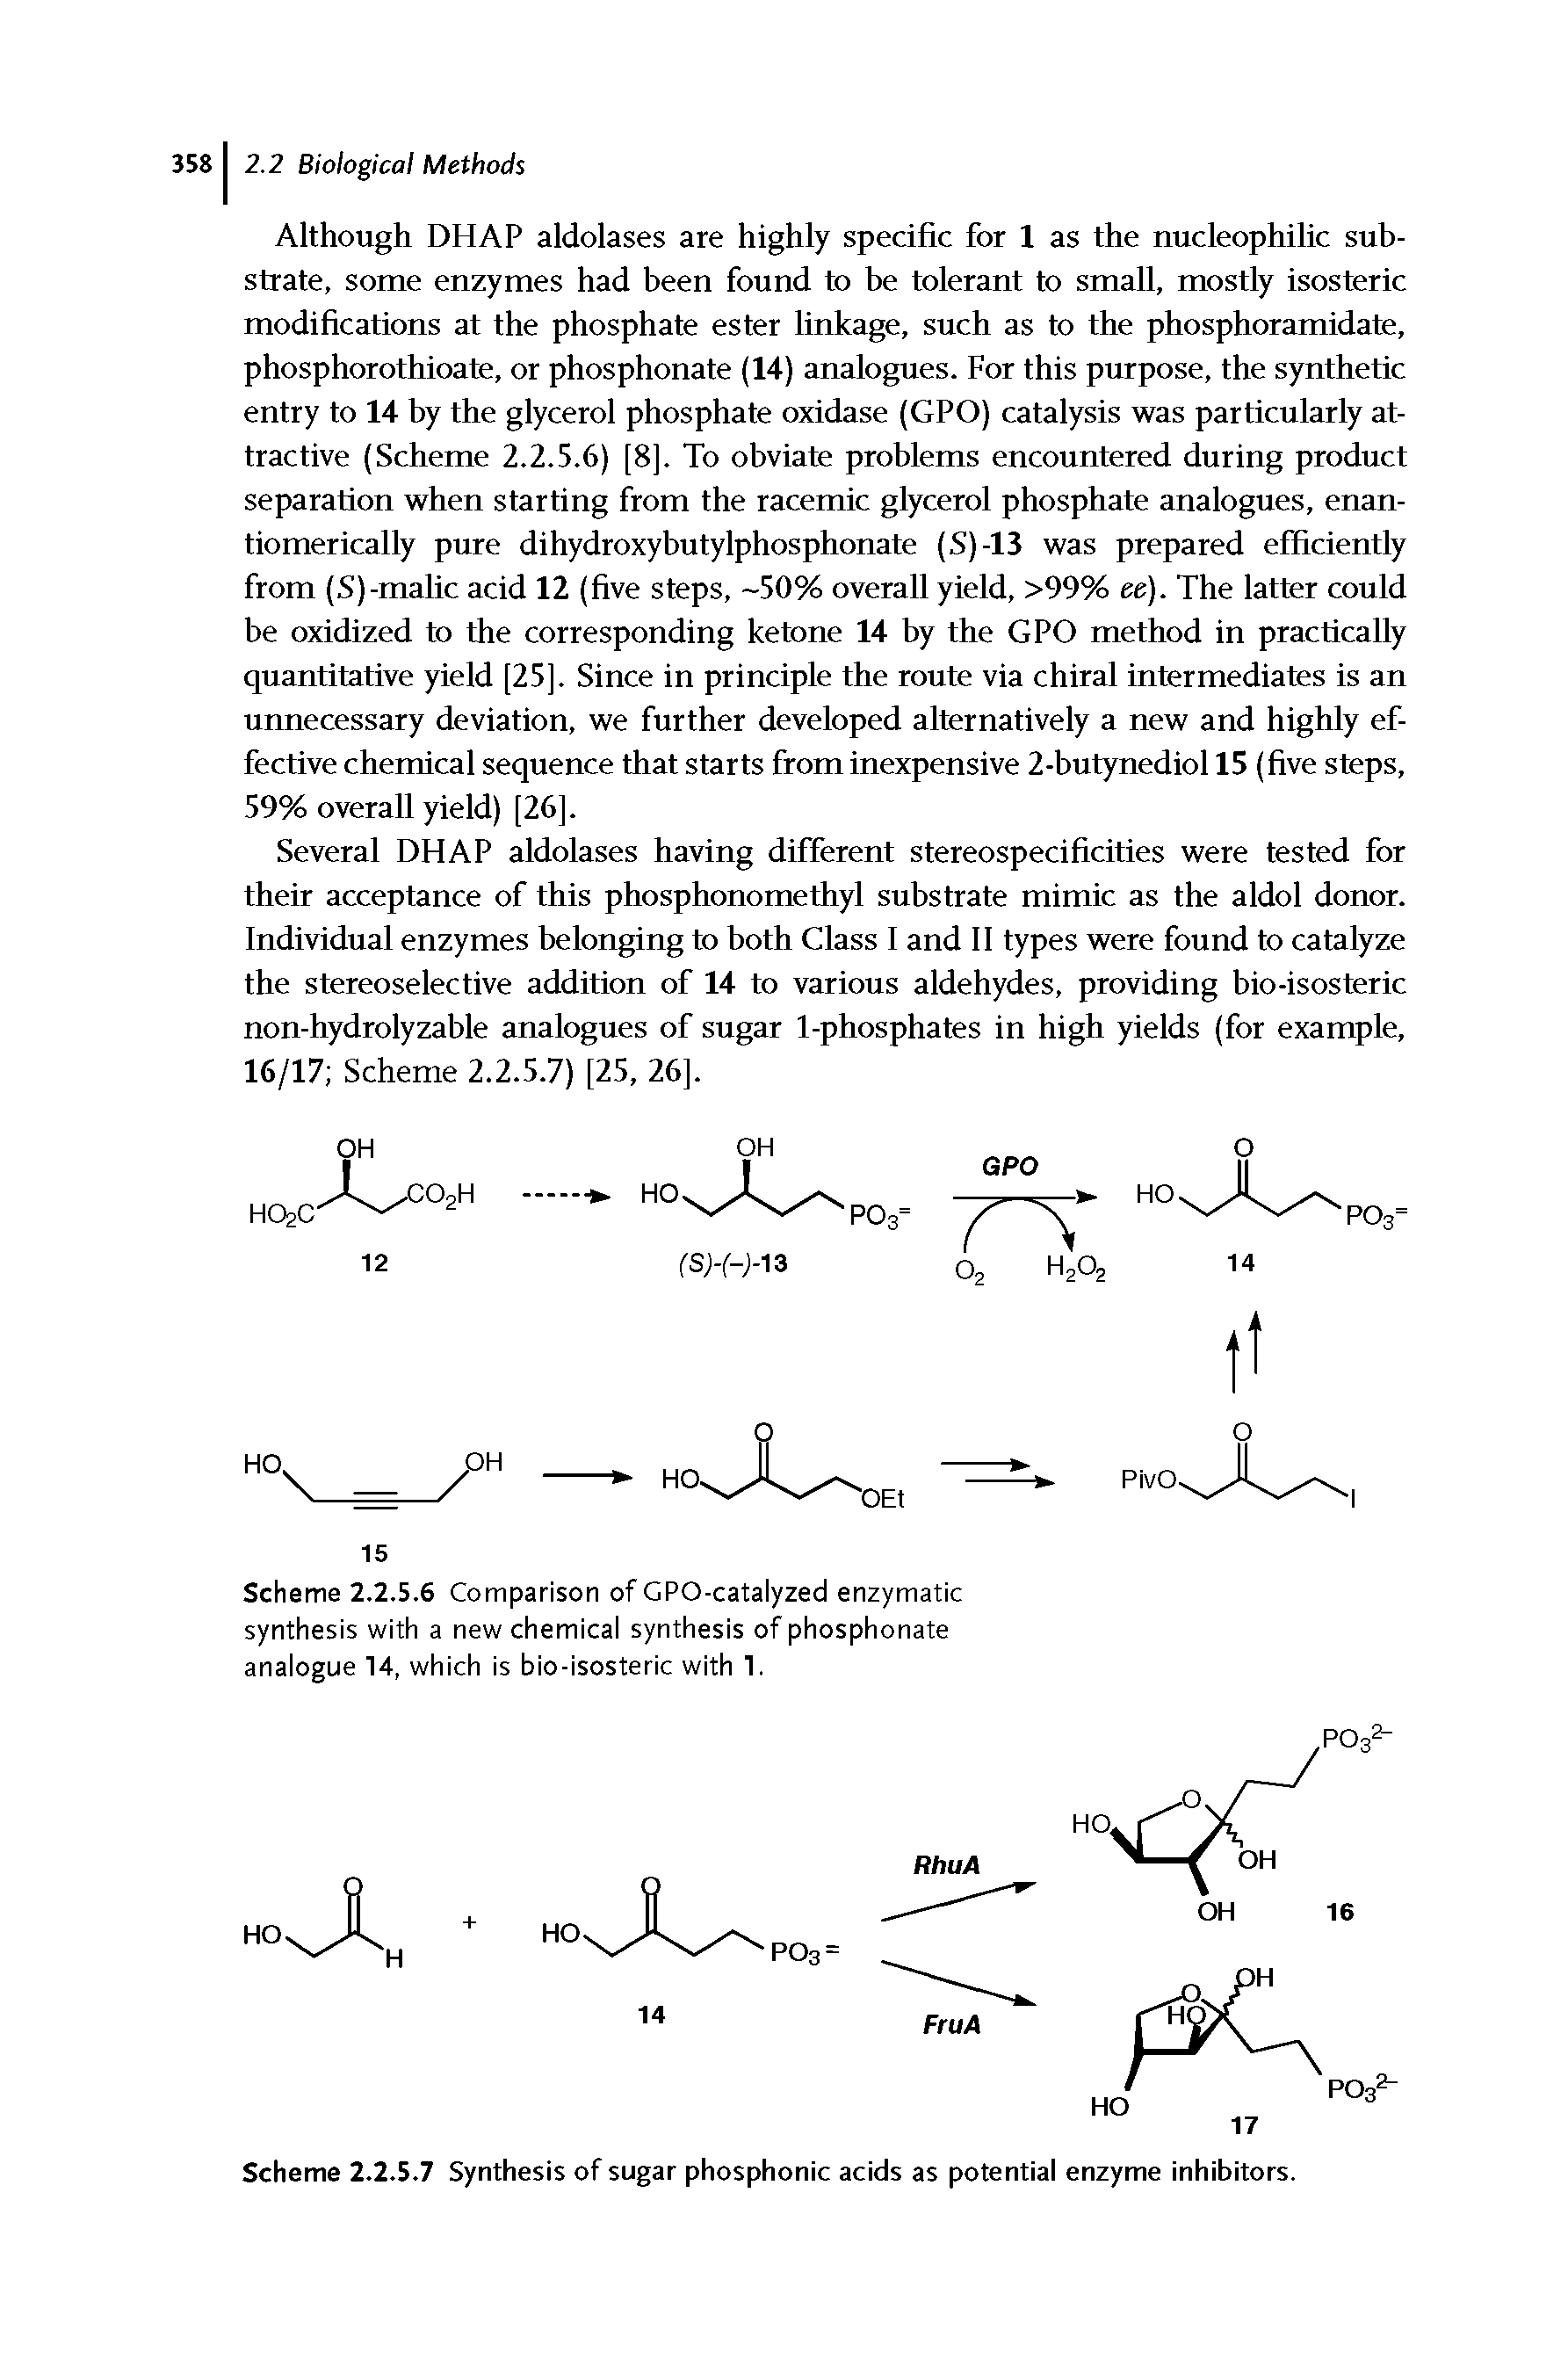 Scheme 2.2.5.6 Comparison of GPO-catalyzed enzymatic synthesis with a new chemical synthesis of phosphonate analogue 14, which is bio-isosteric with 1.